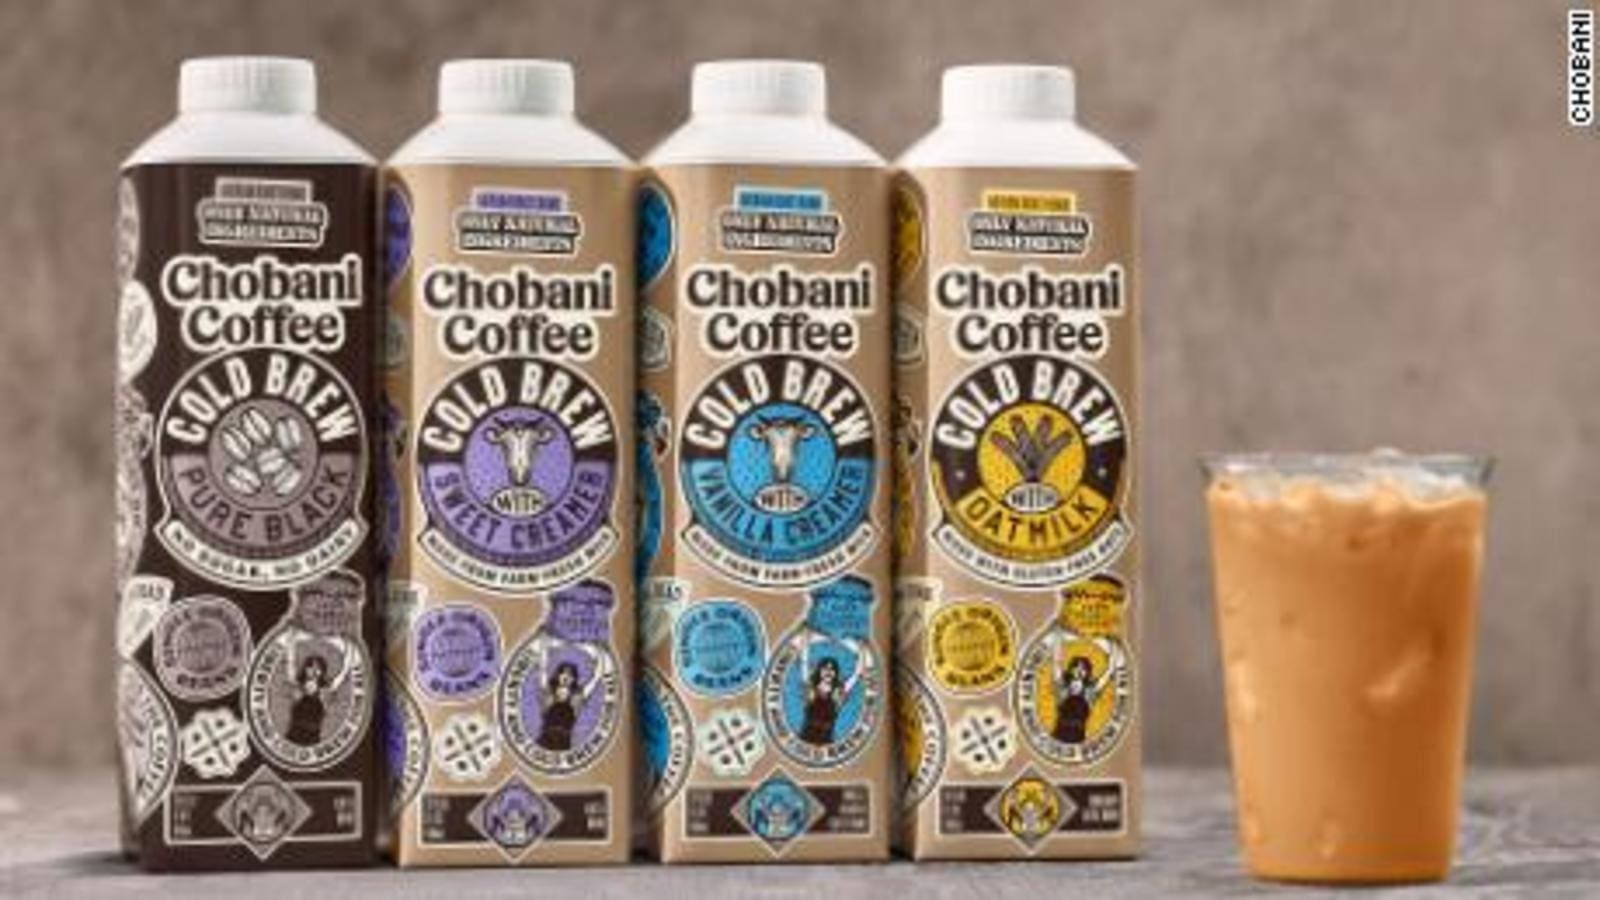 Chobani expands beyond dairy aisle, launches new ready-to-drink coffees